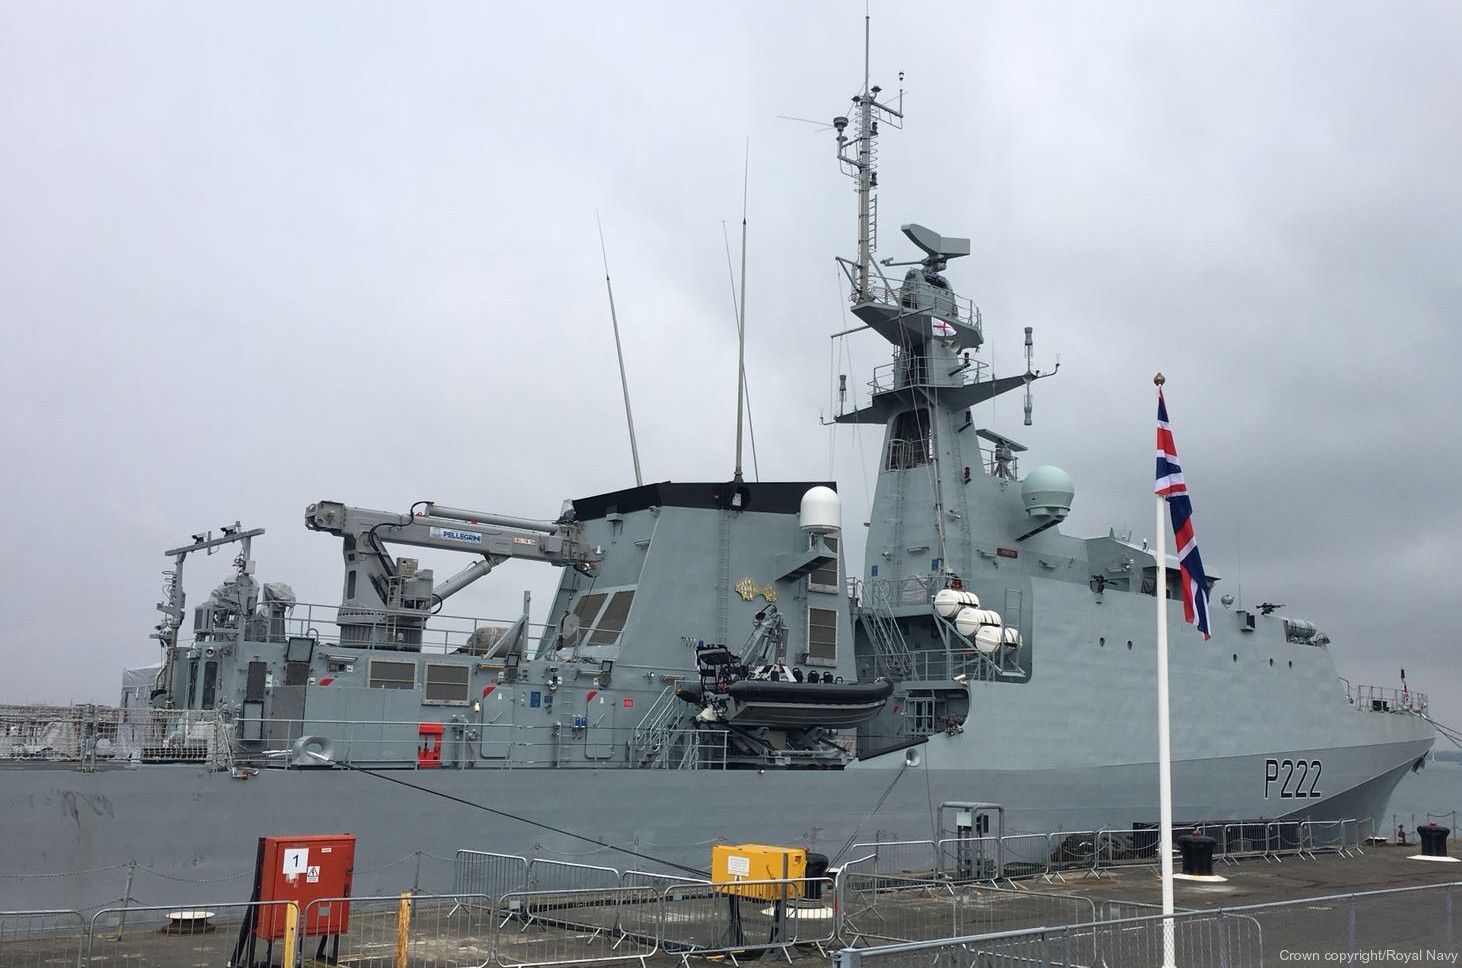 p-222 hms forth river class offshore patrol vessel opv royal navy 17